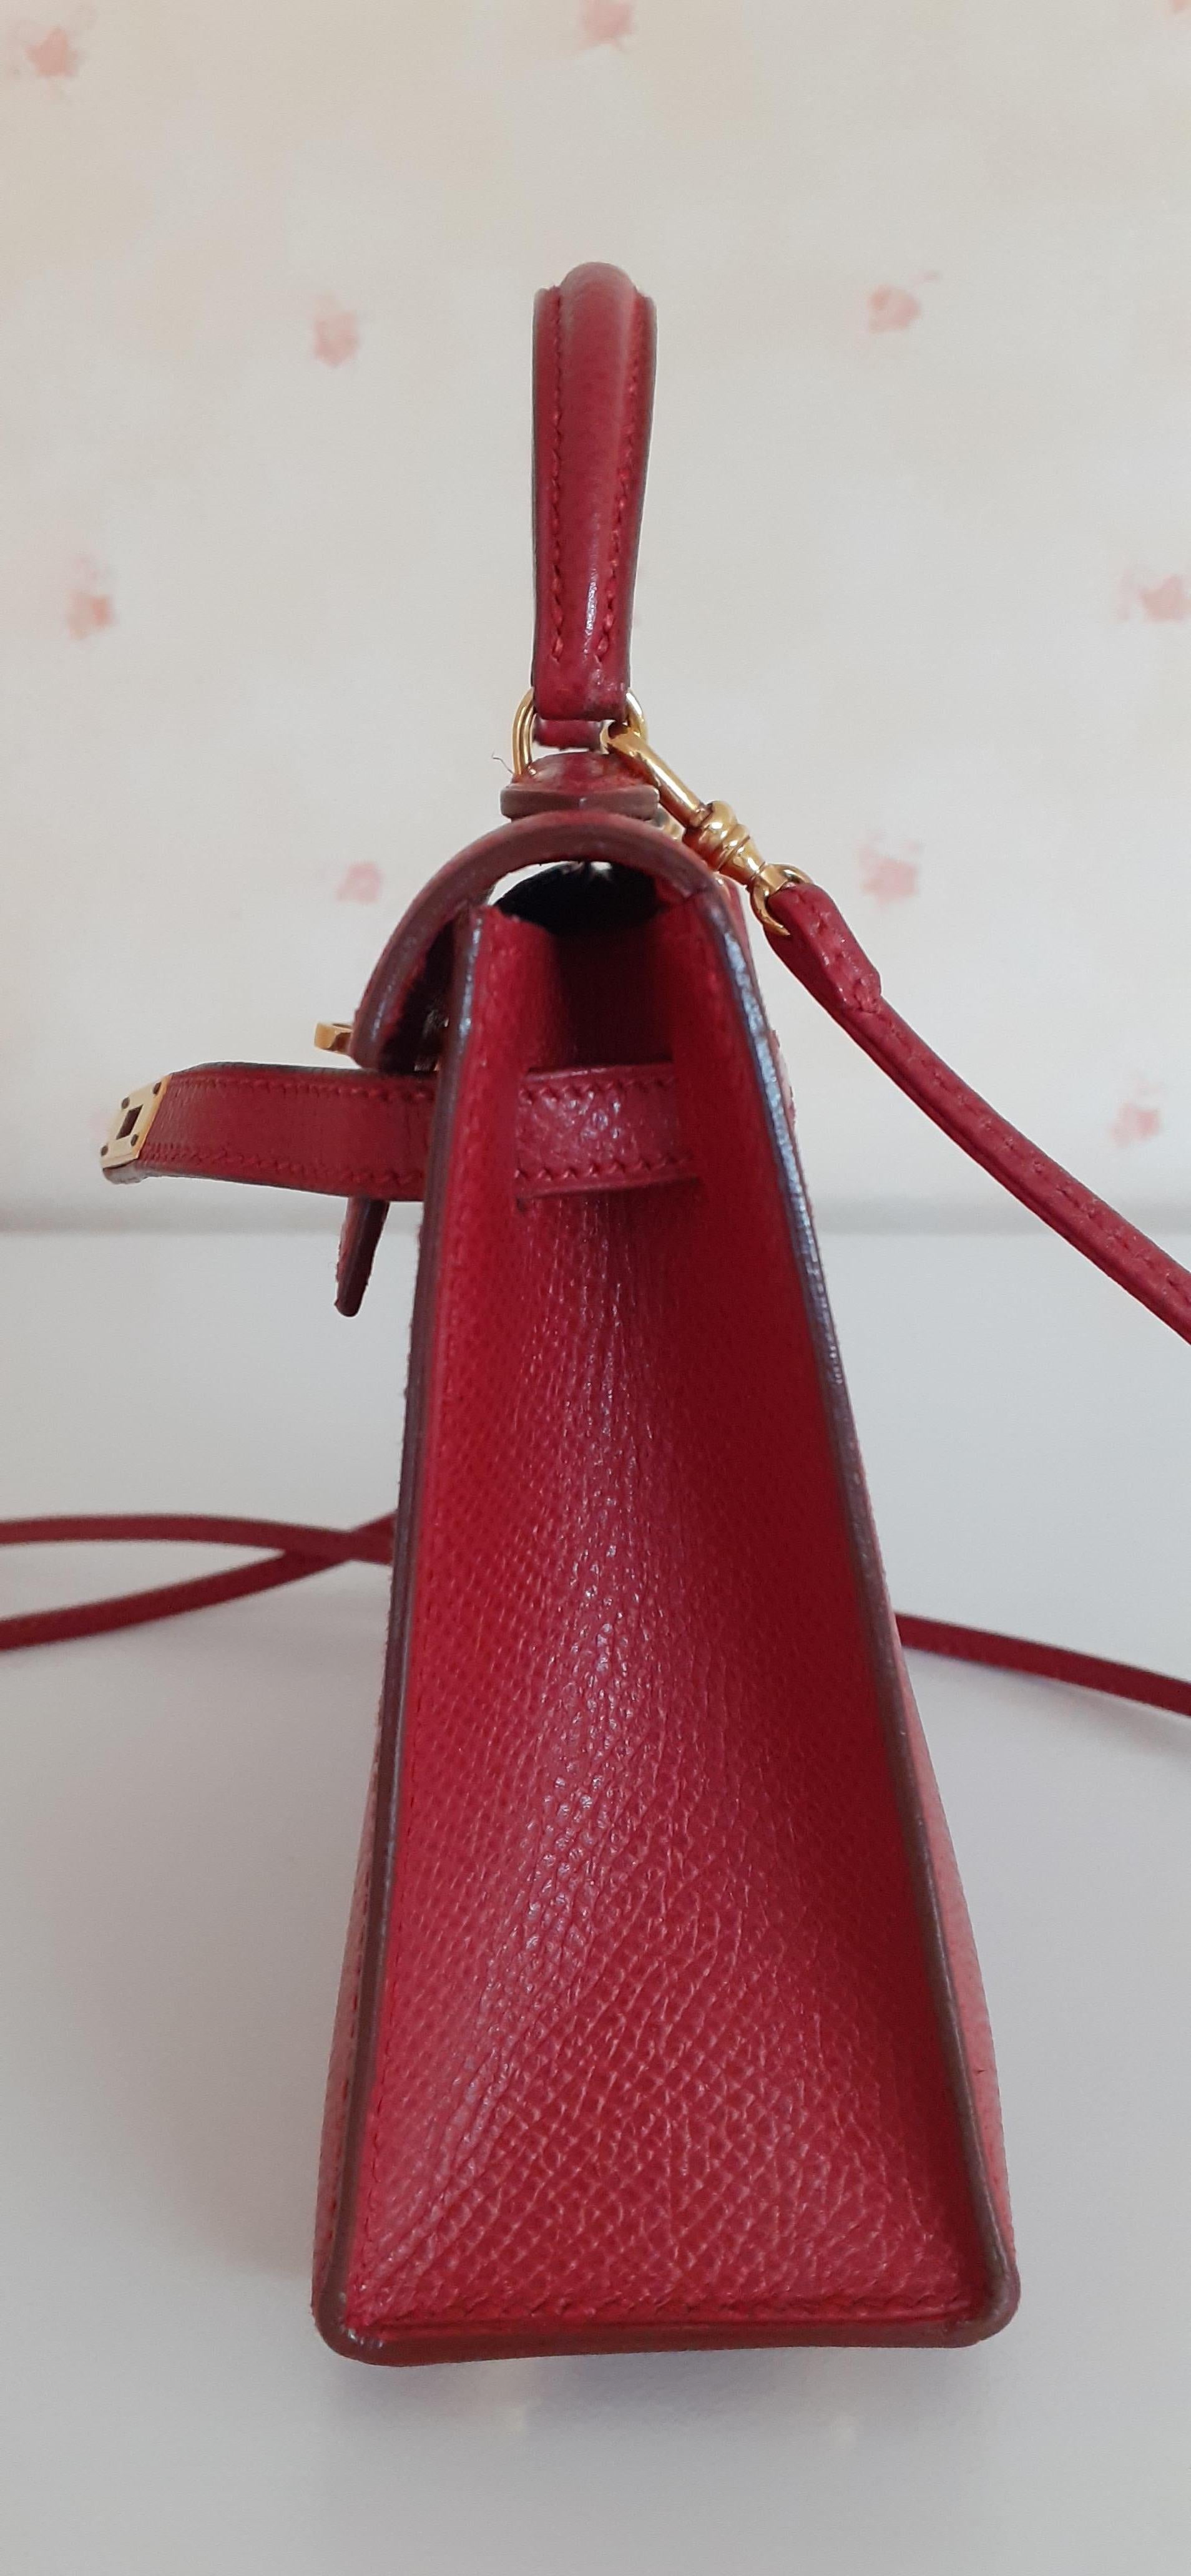 Exceptional Hermès Vintage Micro Kelly 15 cm Sellier Bag Red Leather Gold Hdw For Sale 4